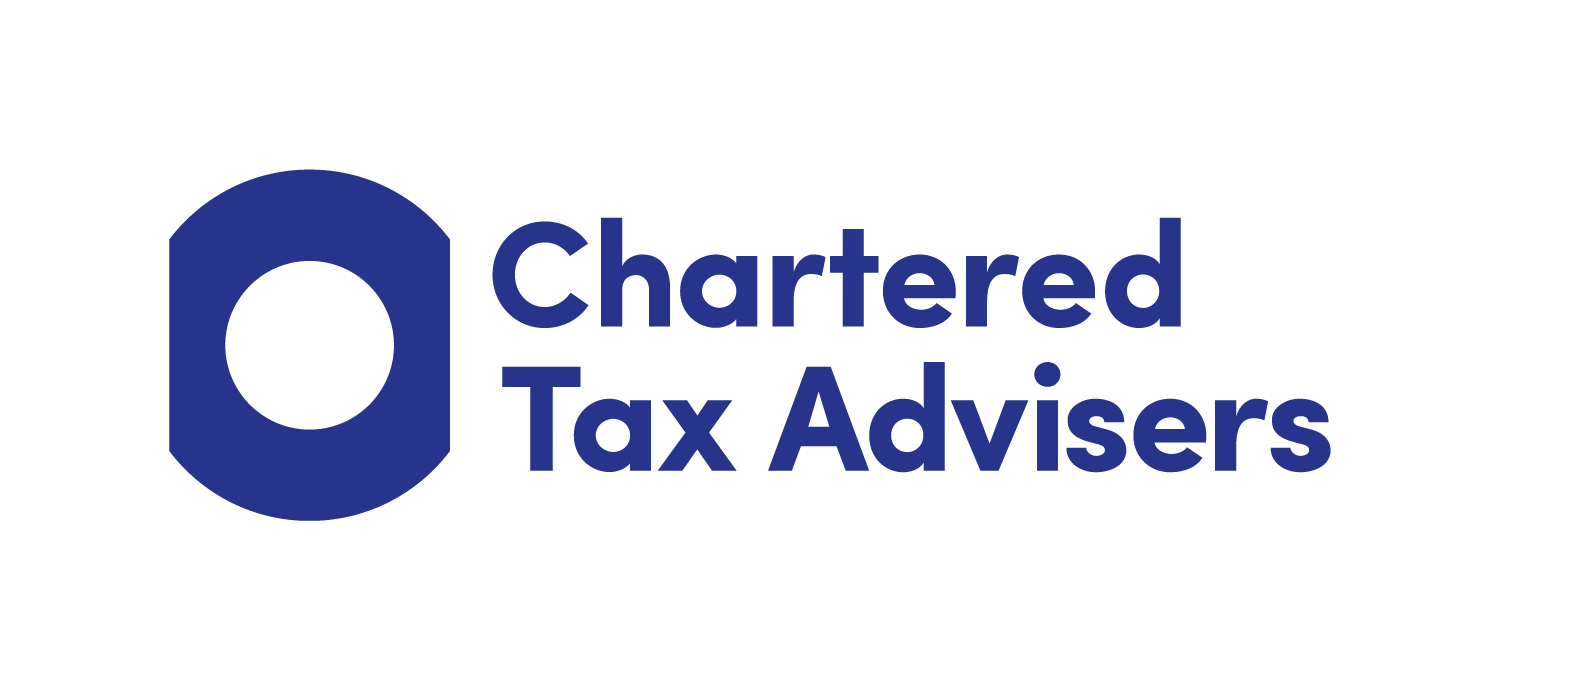 Chartered Institute of Taxation Logo